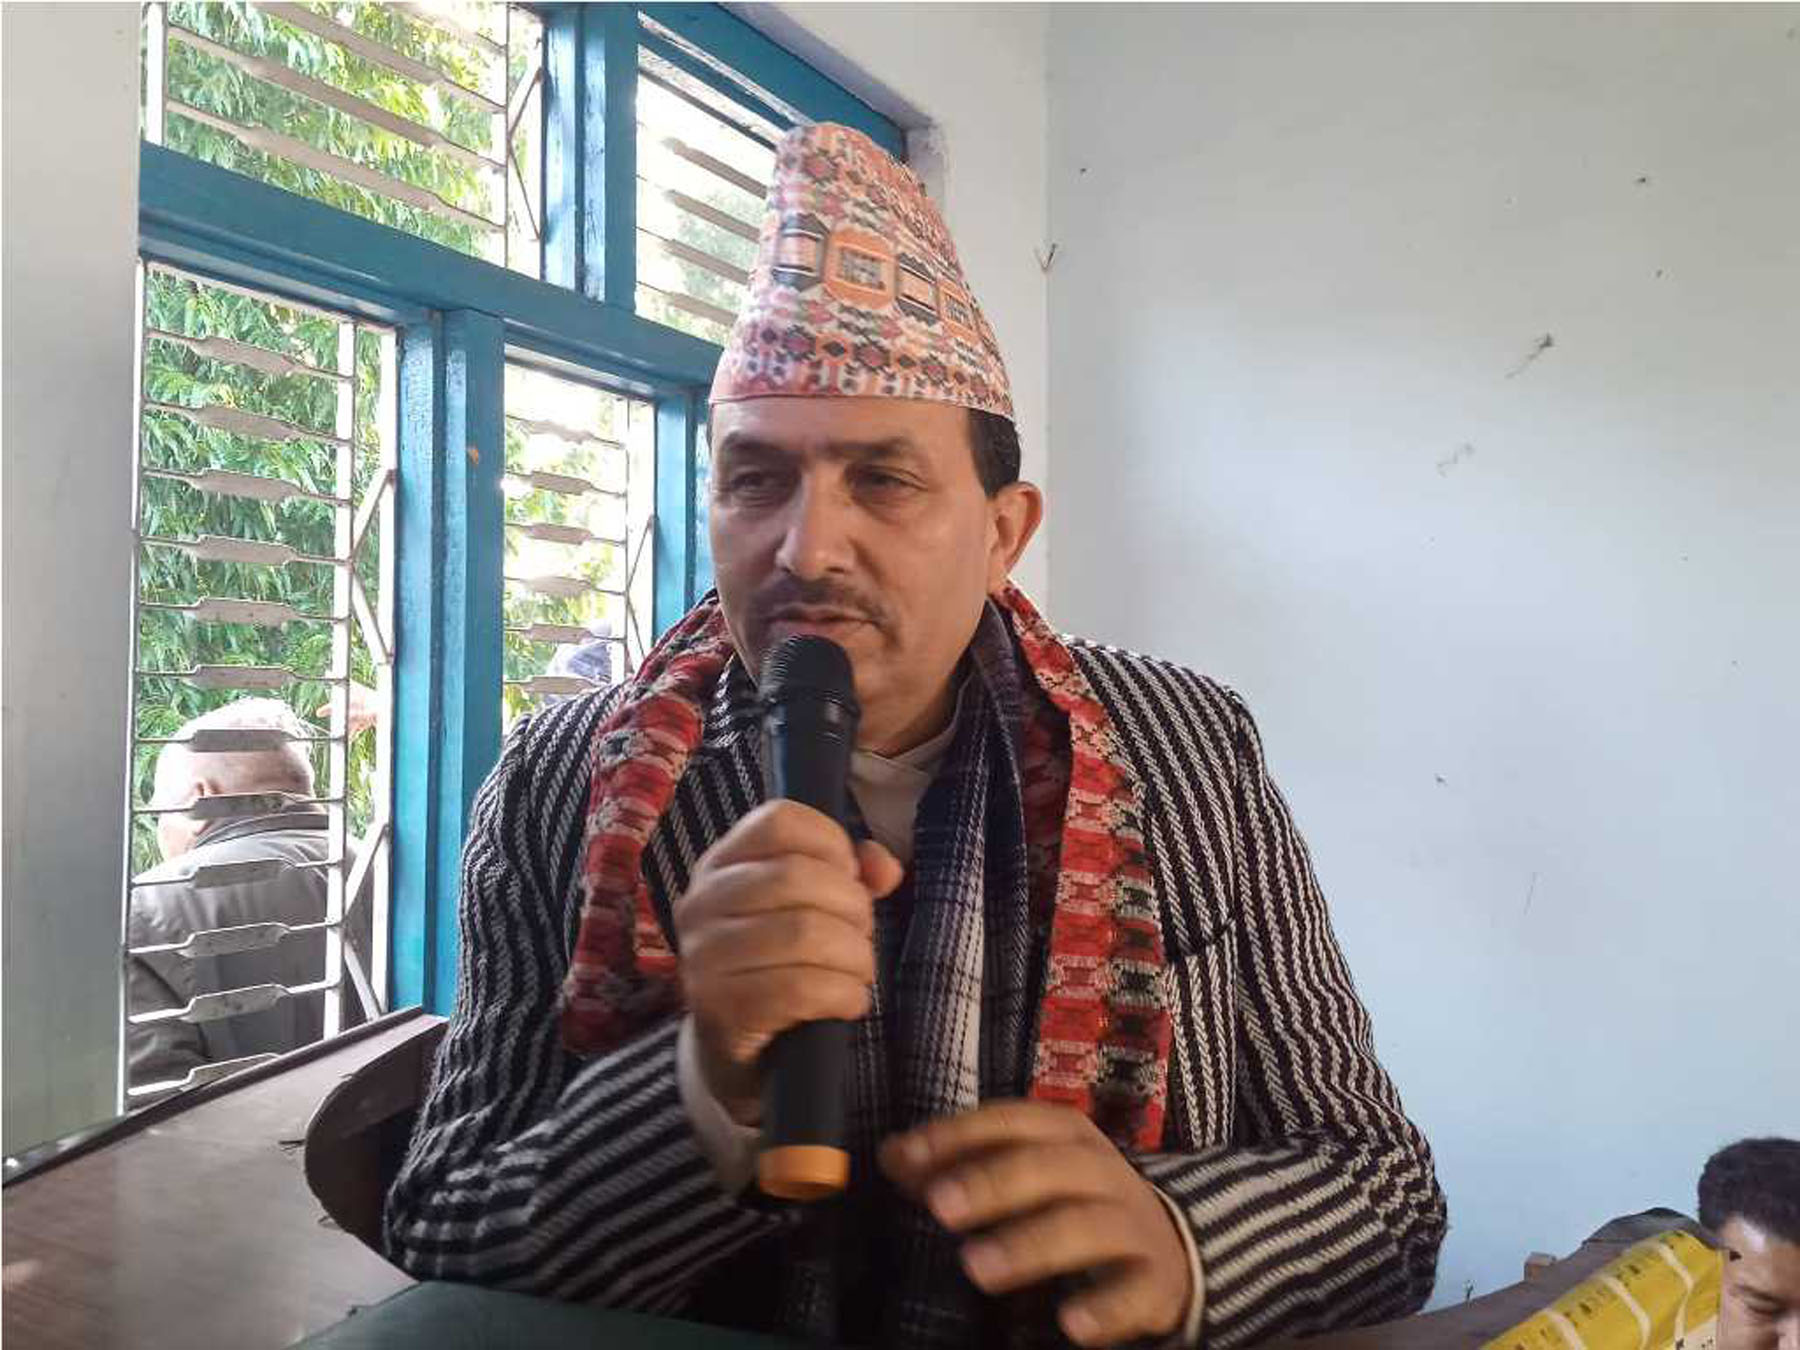 Election is main priority of government: Tourism Minister Dhakal